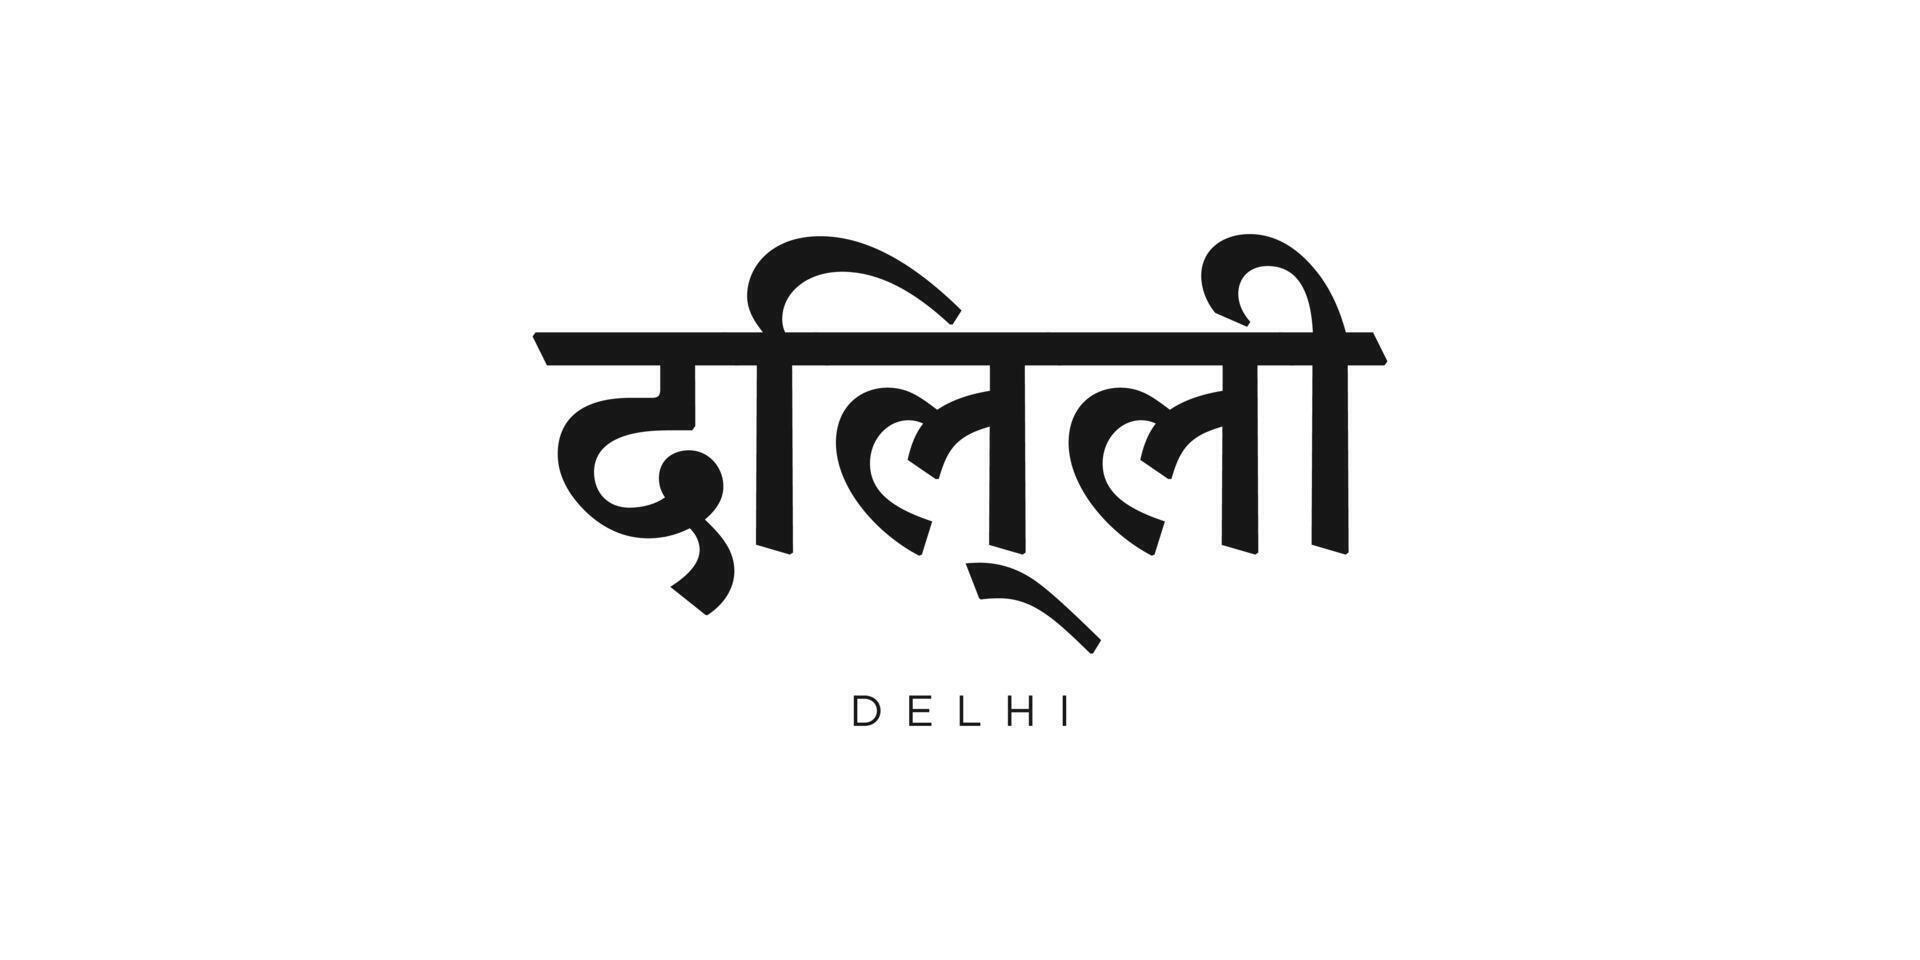 Delhi in the India emblem. The design features a geometric style, vector illustration with bold typography in a modern font. The graphic slogan lettering.